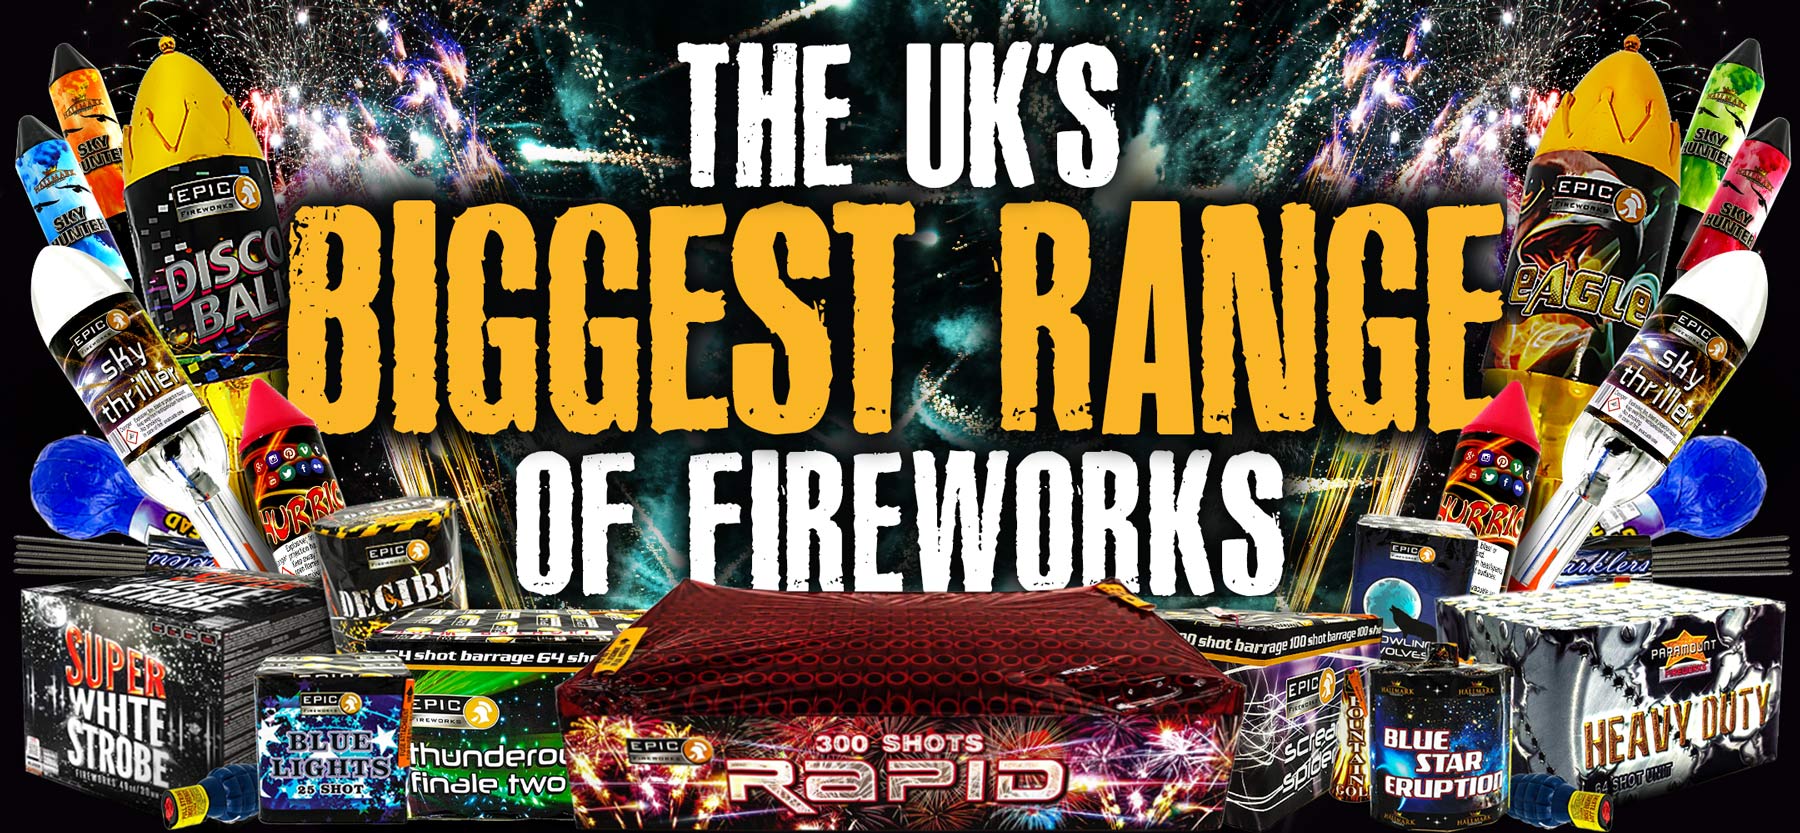 Image reads 'The Uk's biggest range of fireworks' and the text is surrounded by lots of rockets, barrages, mines, and firework explosions.